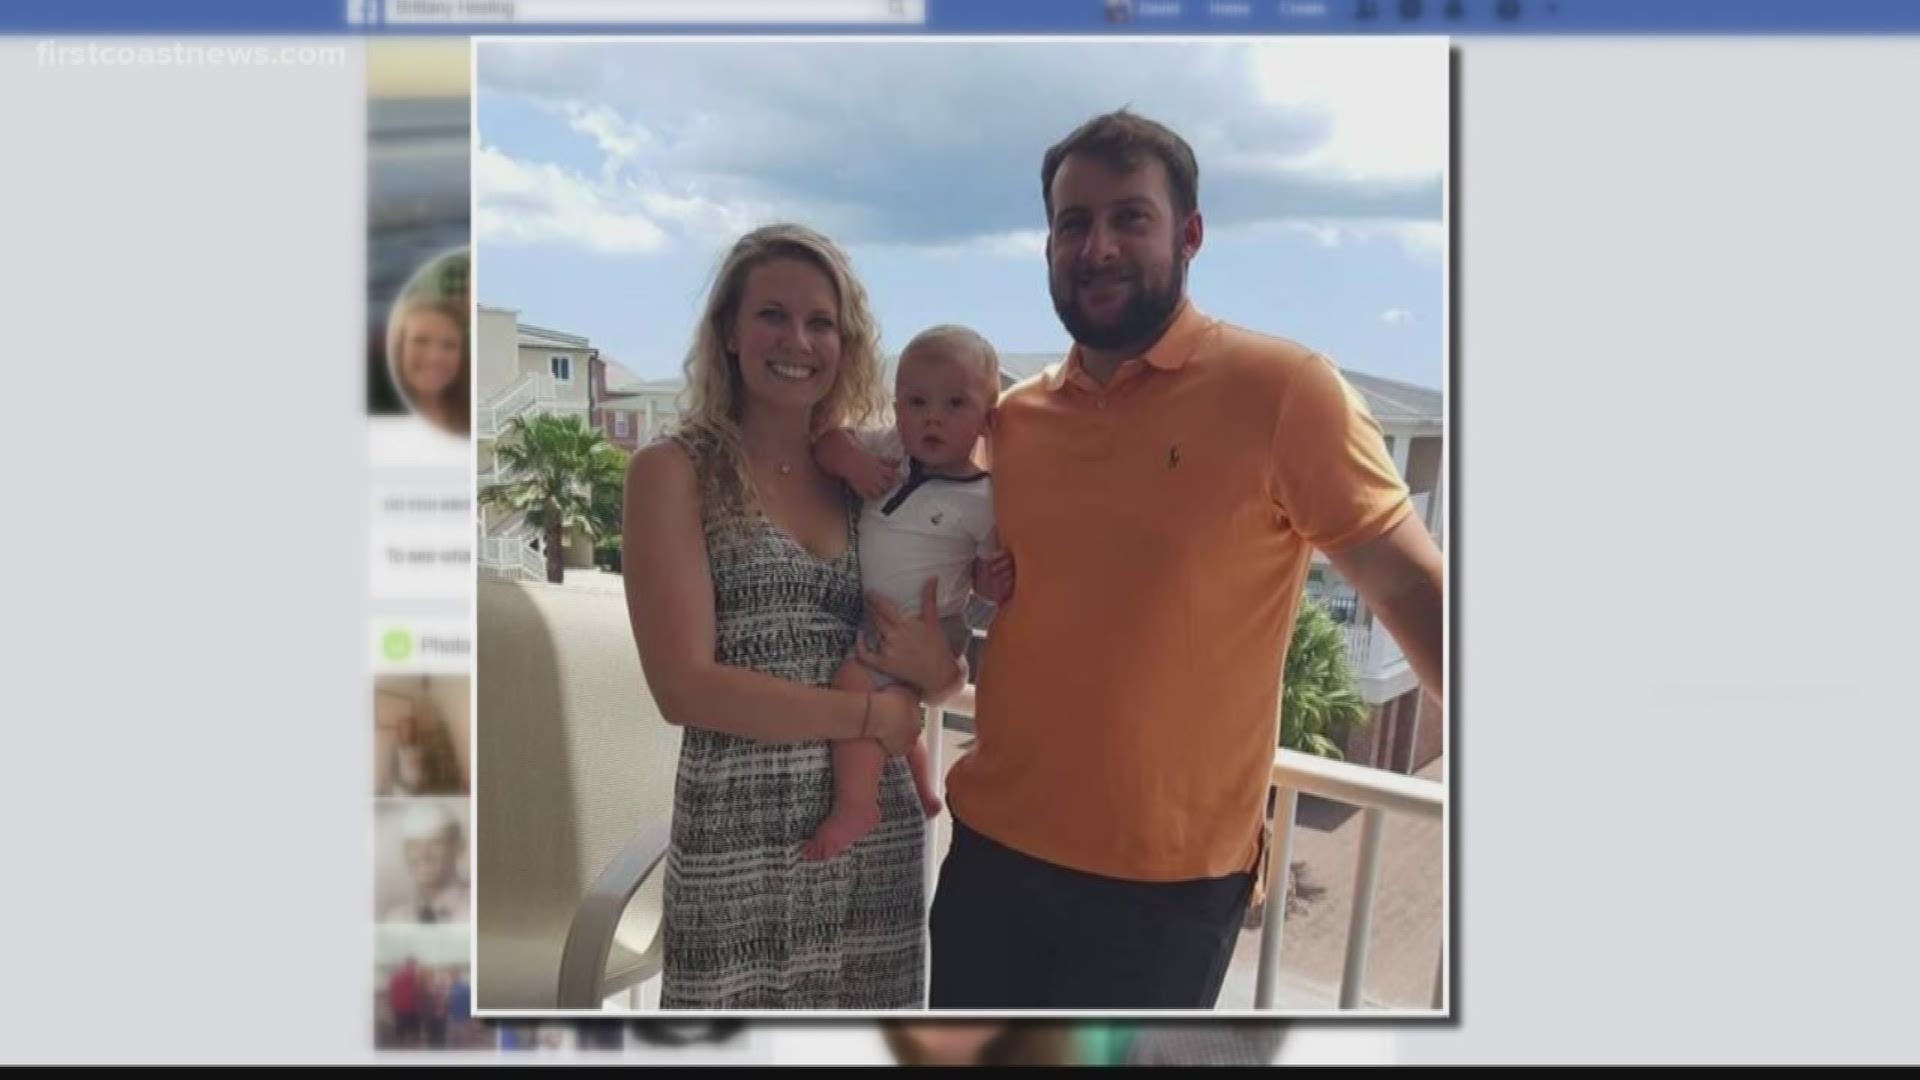 A fatal head-on crash in Alachua County late Saturday left two young parents from St. Marys dead. Friends of the family also say the couple's son did not survive.